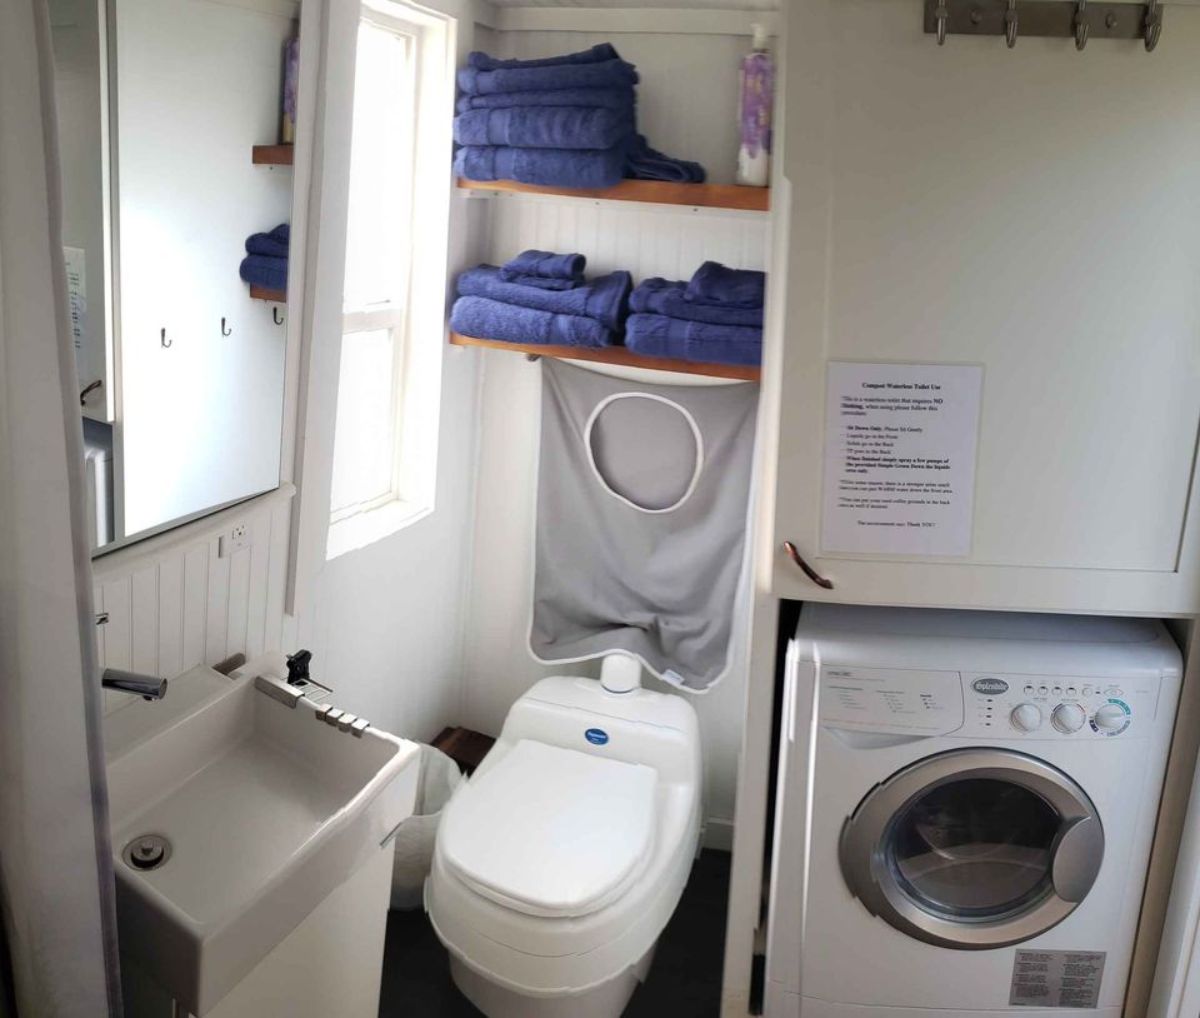 composting toilet and washer dryer combo in bathroom of 28’ upgraded tiny home